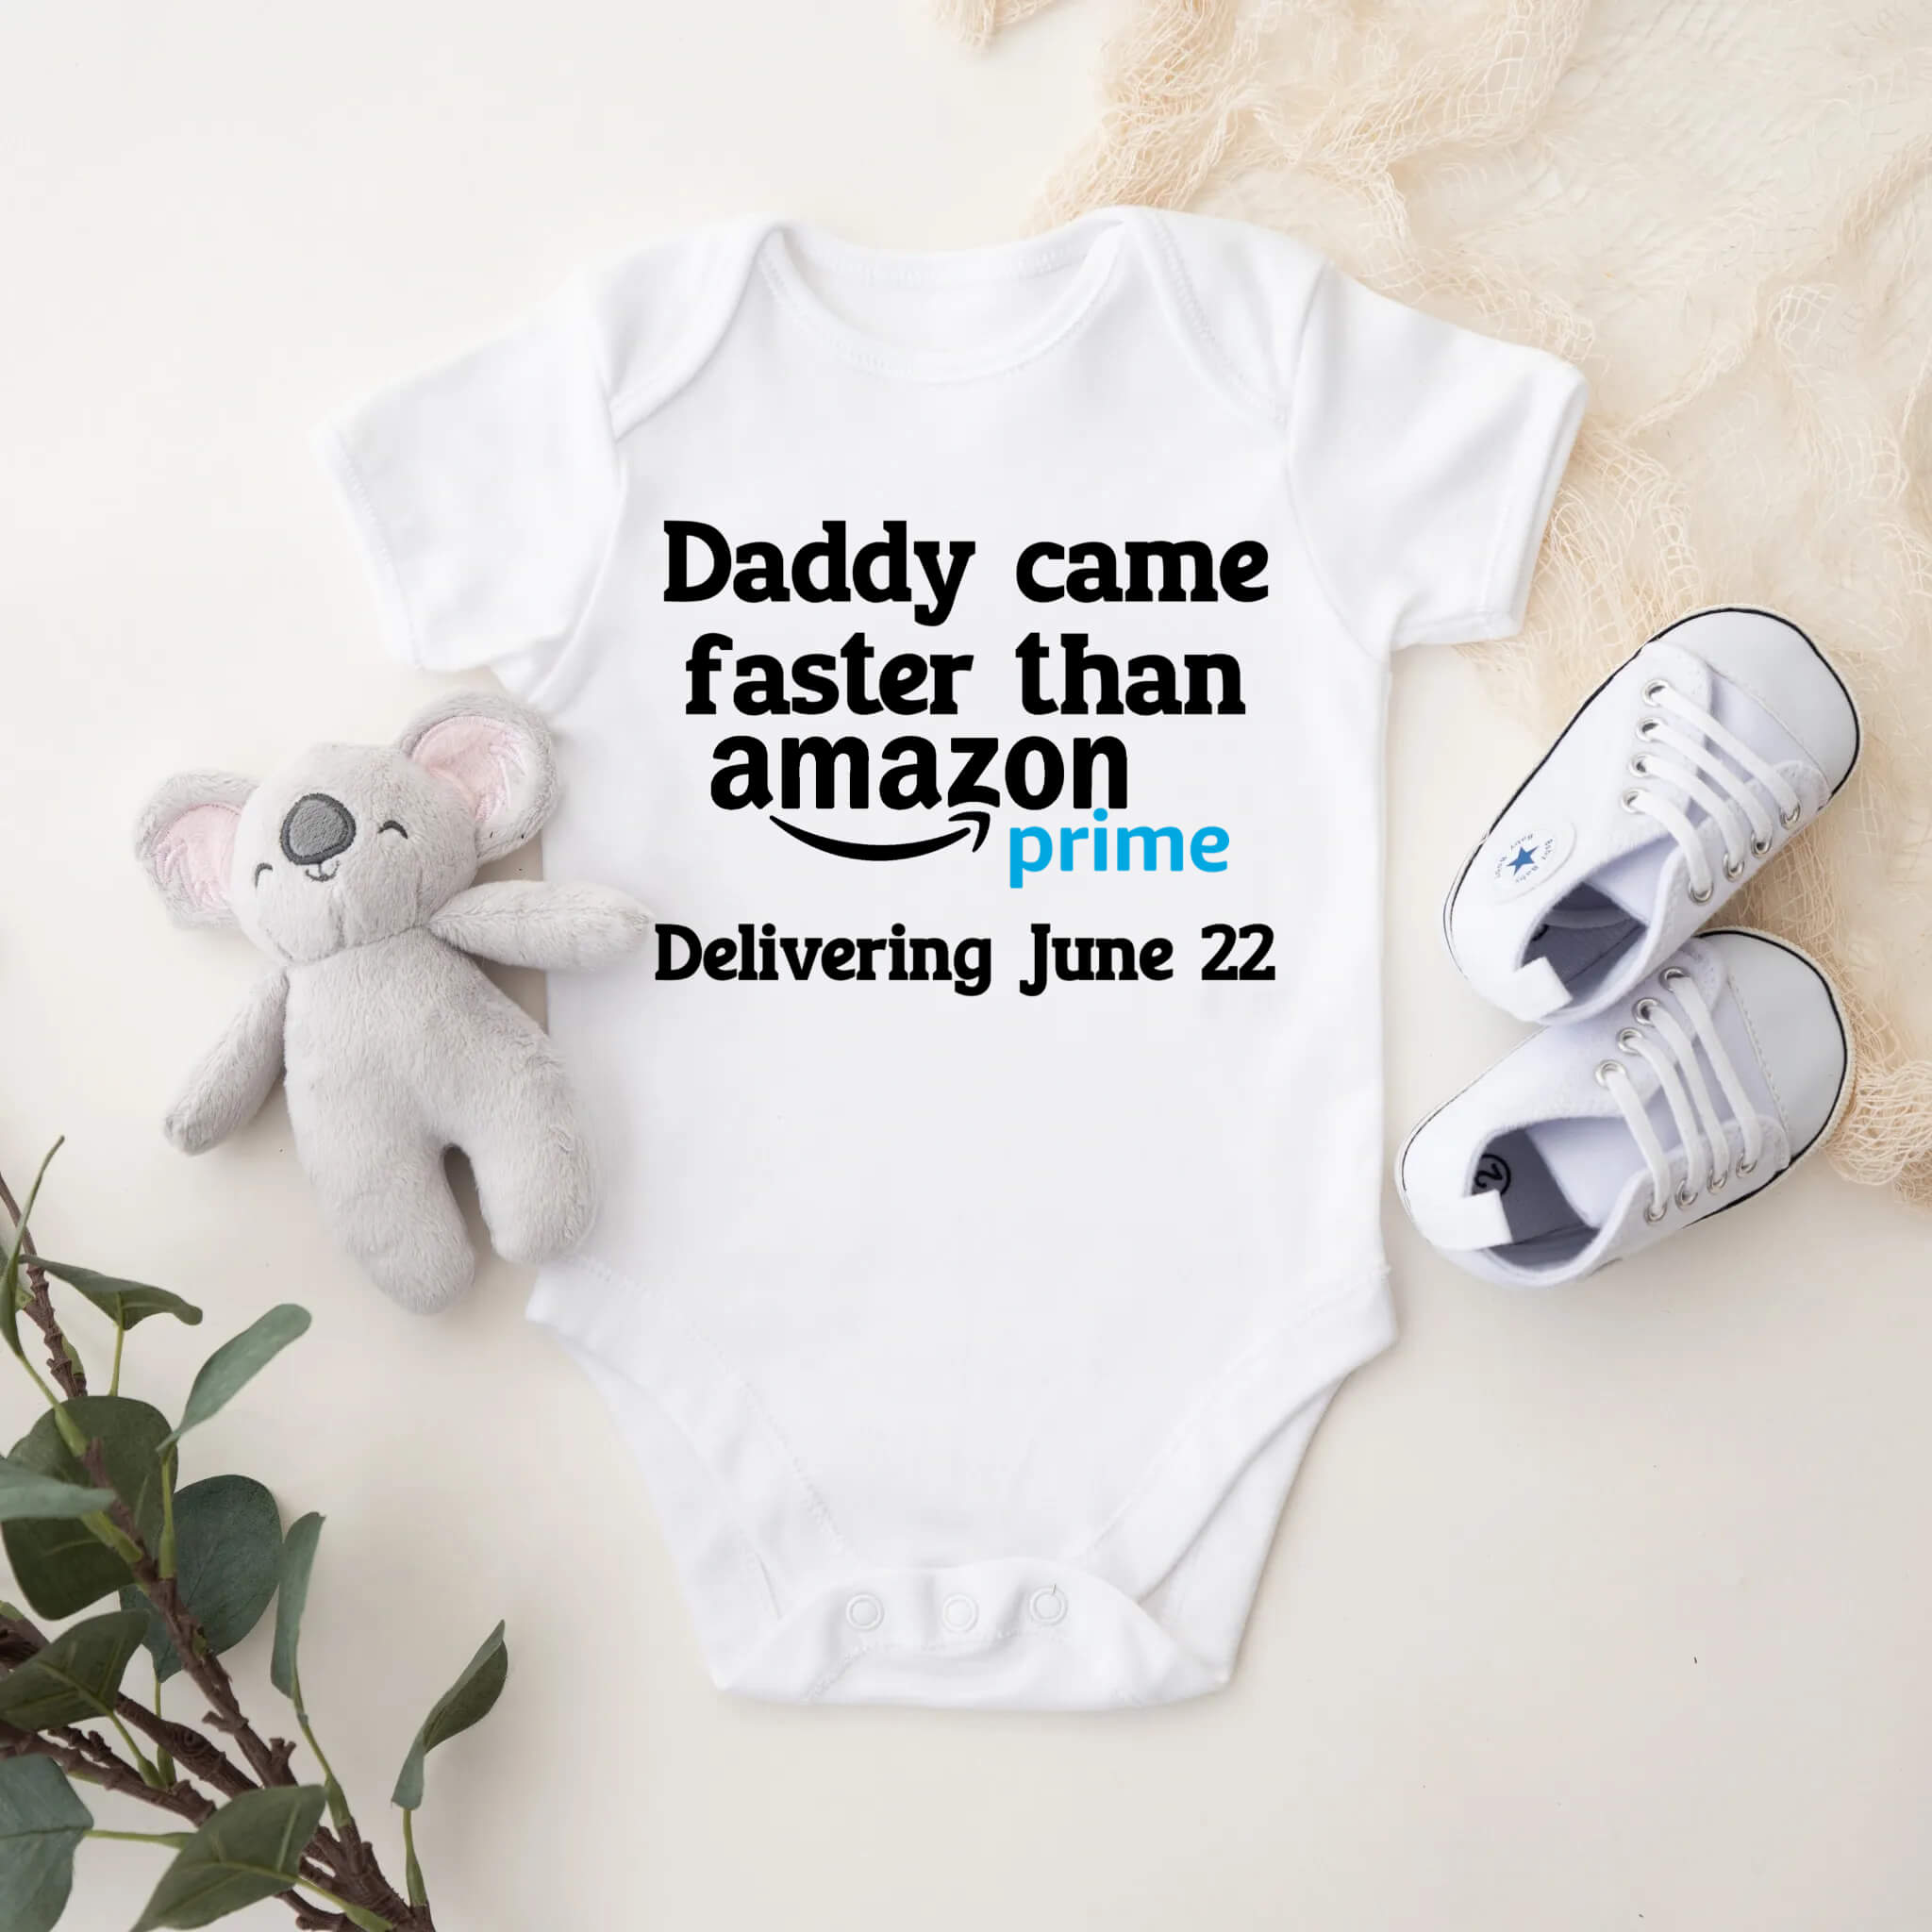 Personalized Pregnancy Announcement, Daddy Came Faster Than Prime Delivery, Dad, Grandma, Grandpa, Auntie, Uncle To Be, Funny Customized Baby Announcement Onesie, Personalized Due Date Onesie Gift Box